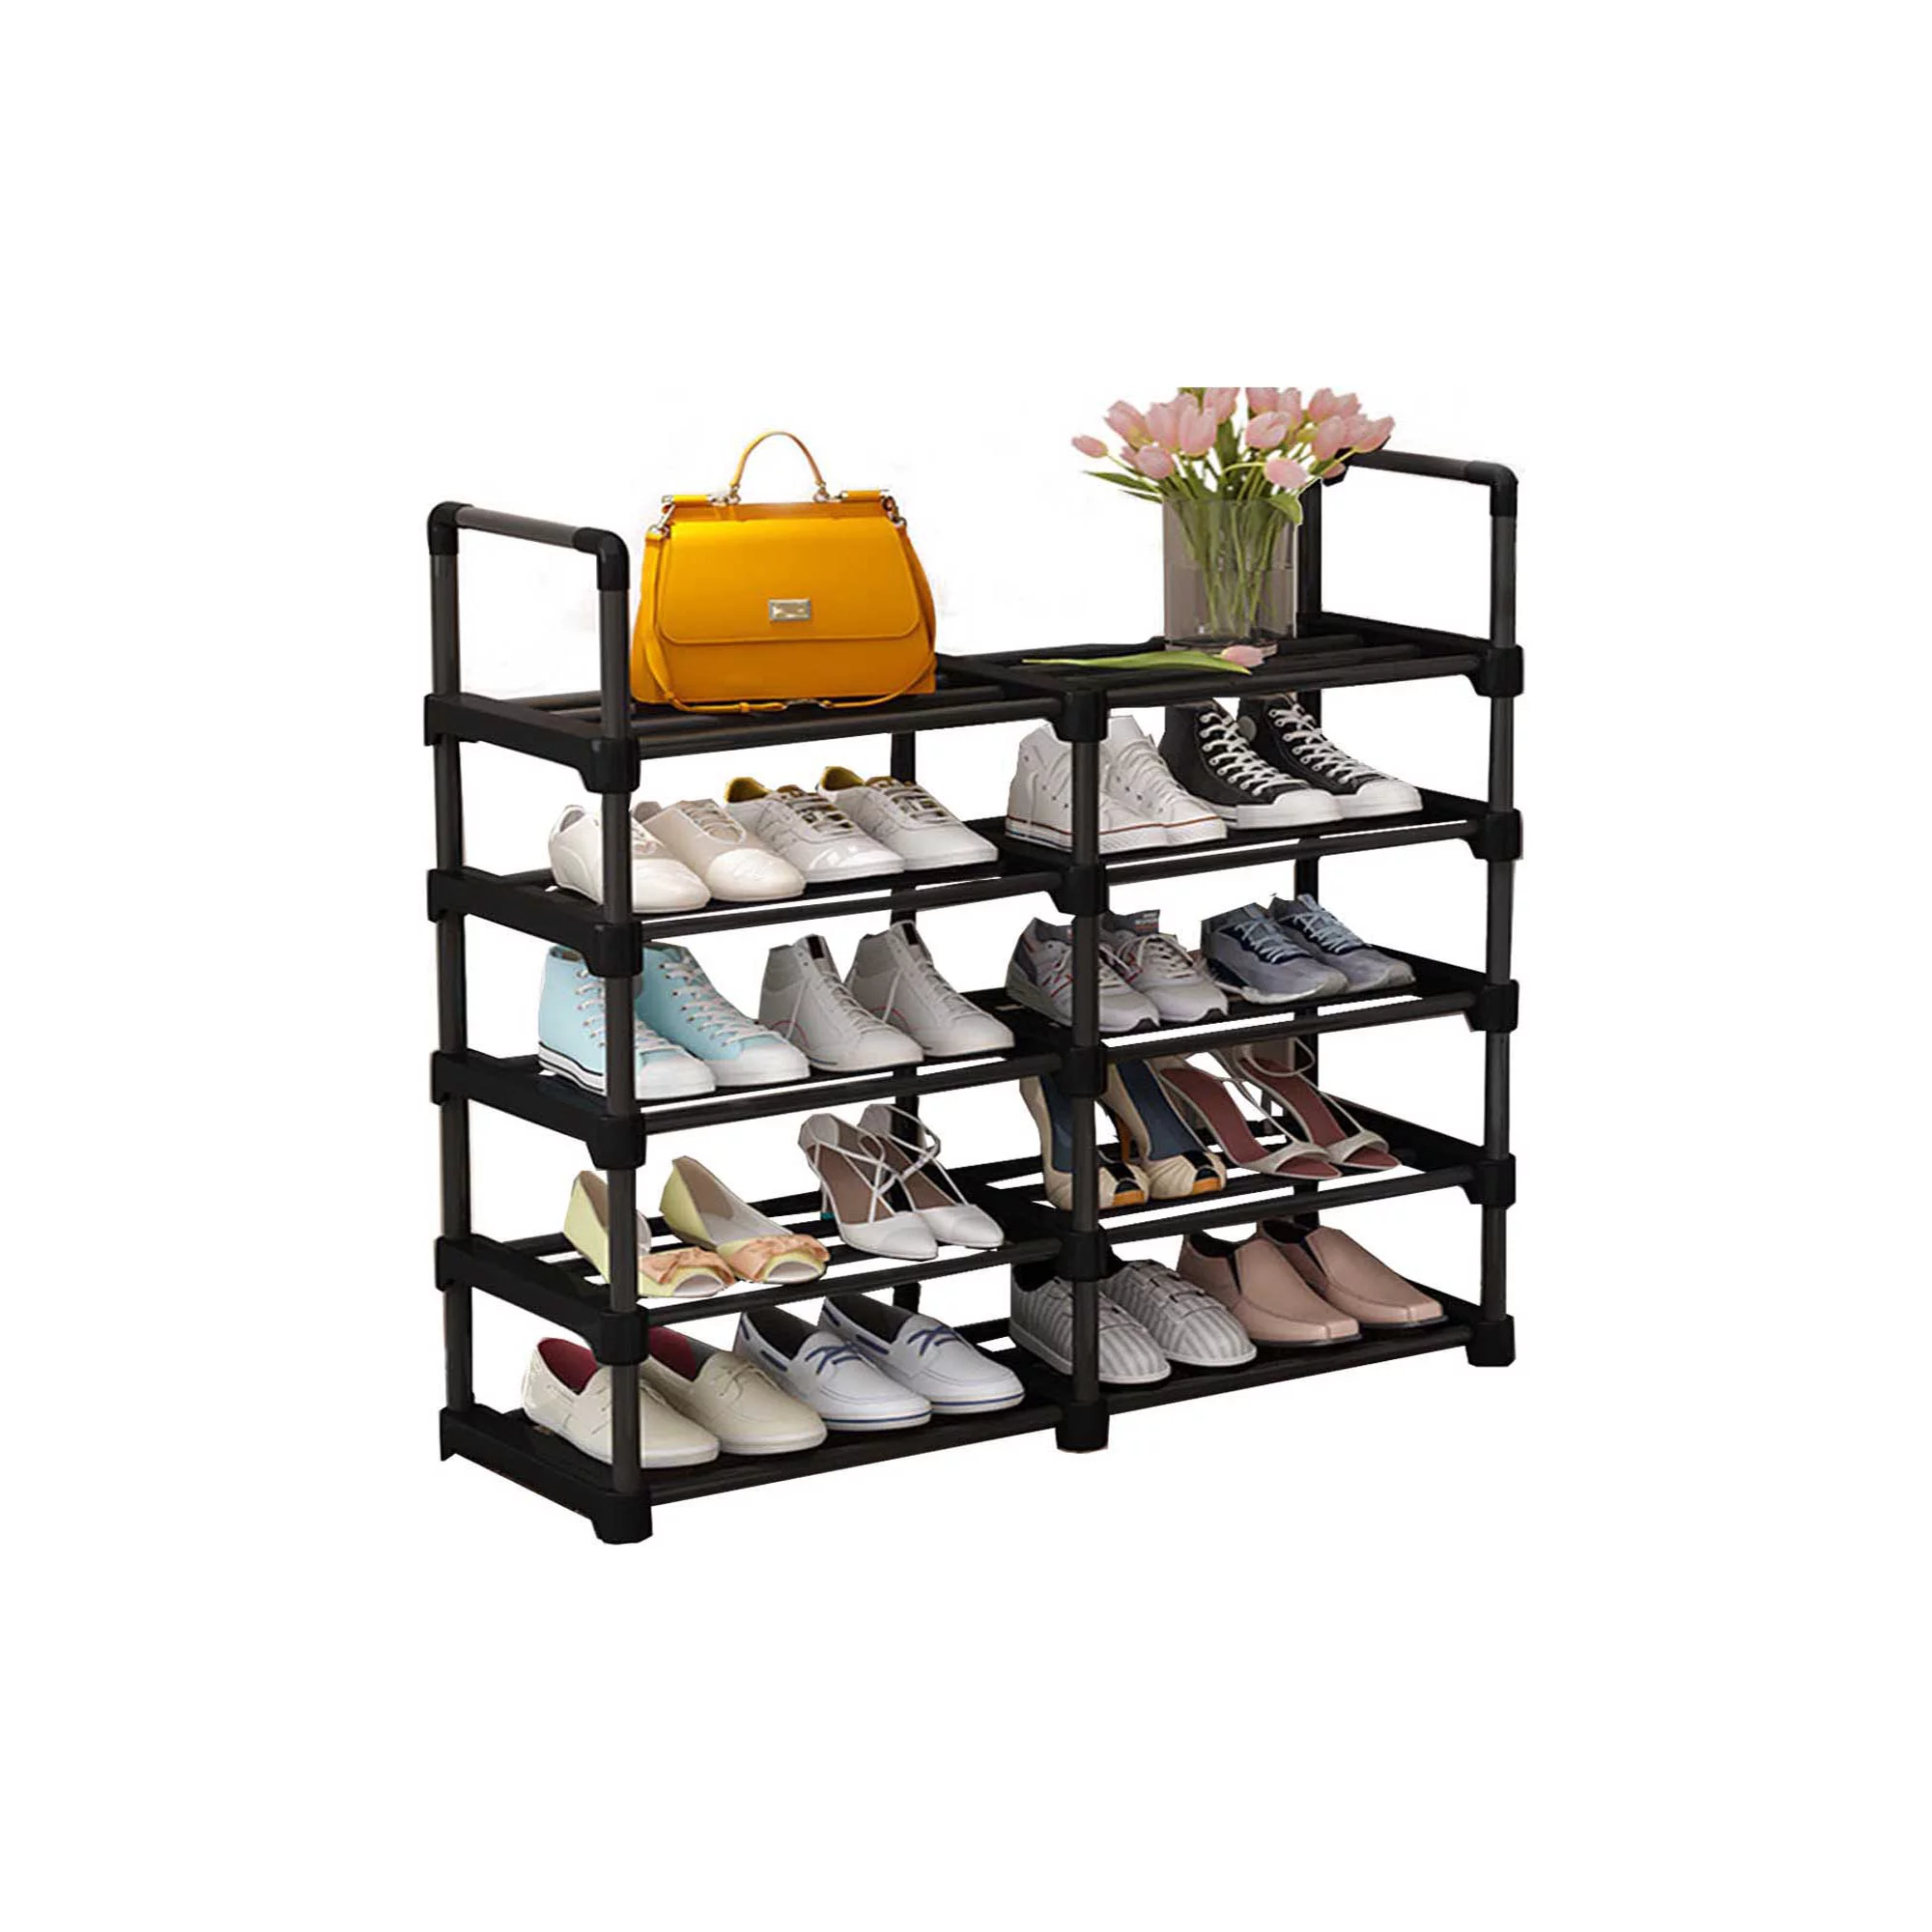 https://discounttoday.net/wp-content/uploads/2023/01/Musment-Shoe-Rack-Shoe-Organizer-20-24-Pairs-Shoes-Storage-Organizer-Metal-StackableRemovable-Multifunctional-Show-Rack-for-EntrywayCloset-and-Bedroom-2.webp